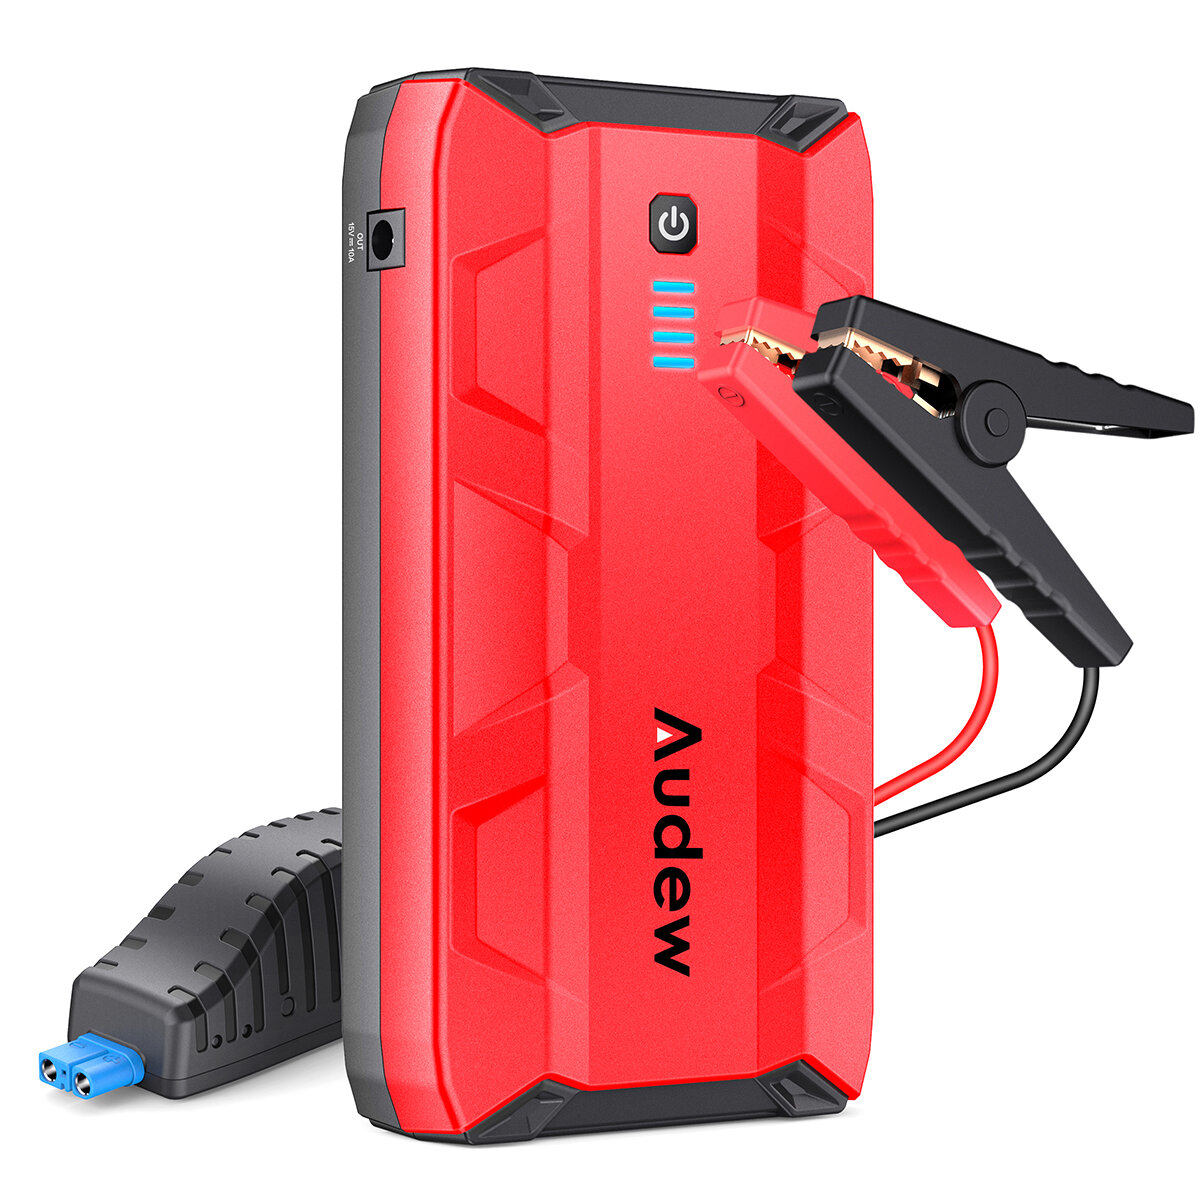 Image of Audew 1000A Peak 10800mAh Portable Car Jump Starter Auto Battery Booster 12V Car Jumper Power Bank Power Pack with Dual